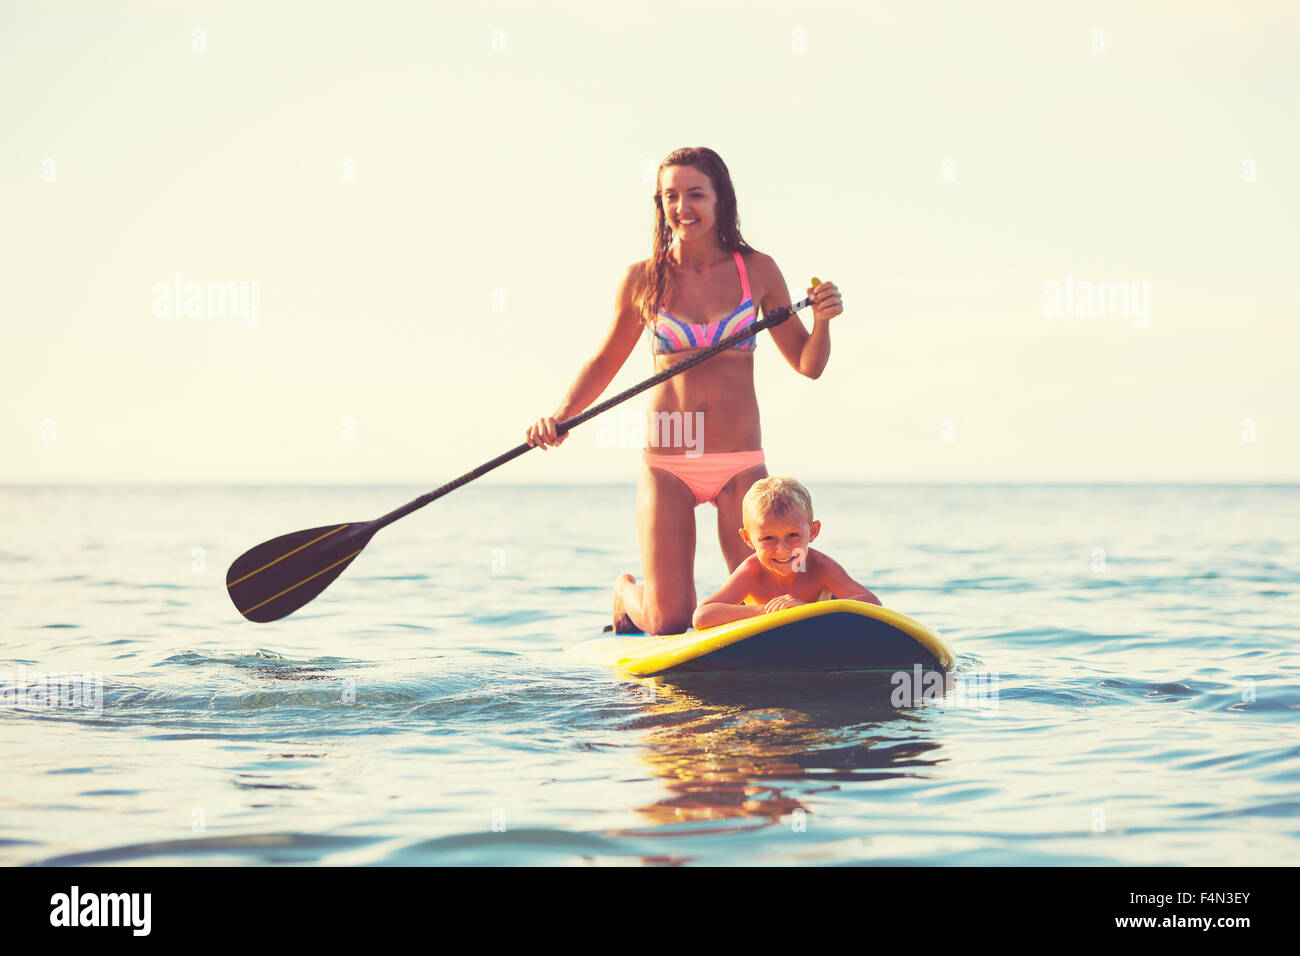 Mother and son stand up paddling at sunrise, Summer fun outdoor lifestyle Stock Photo